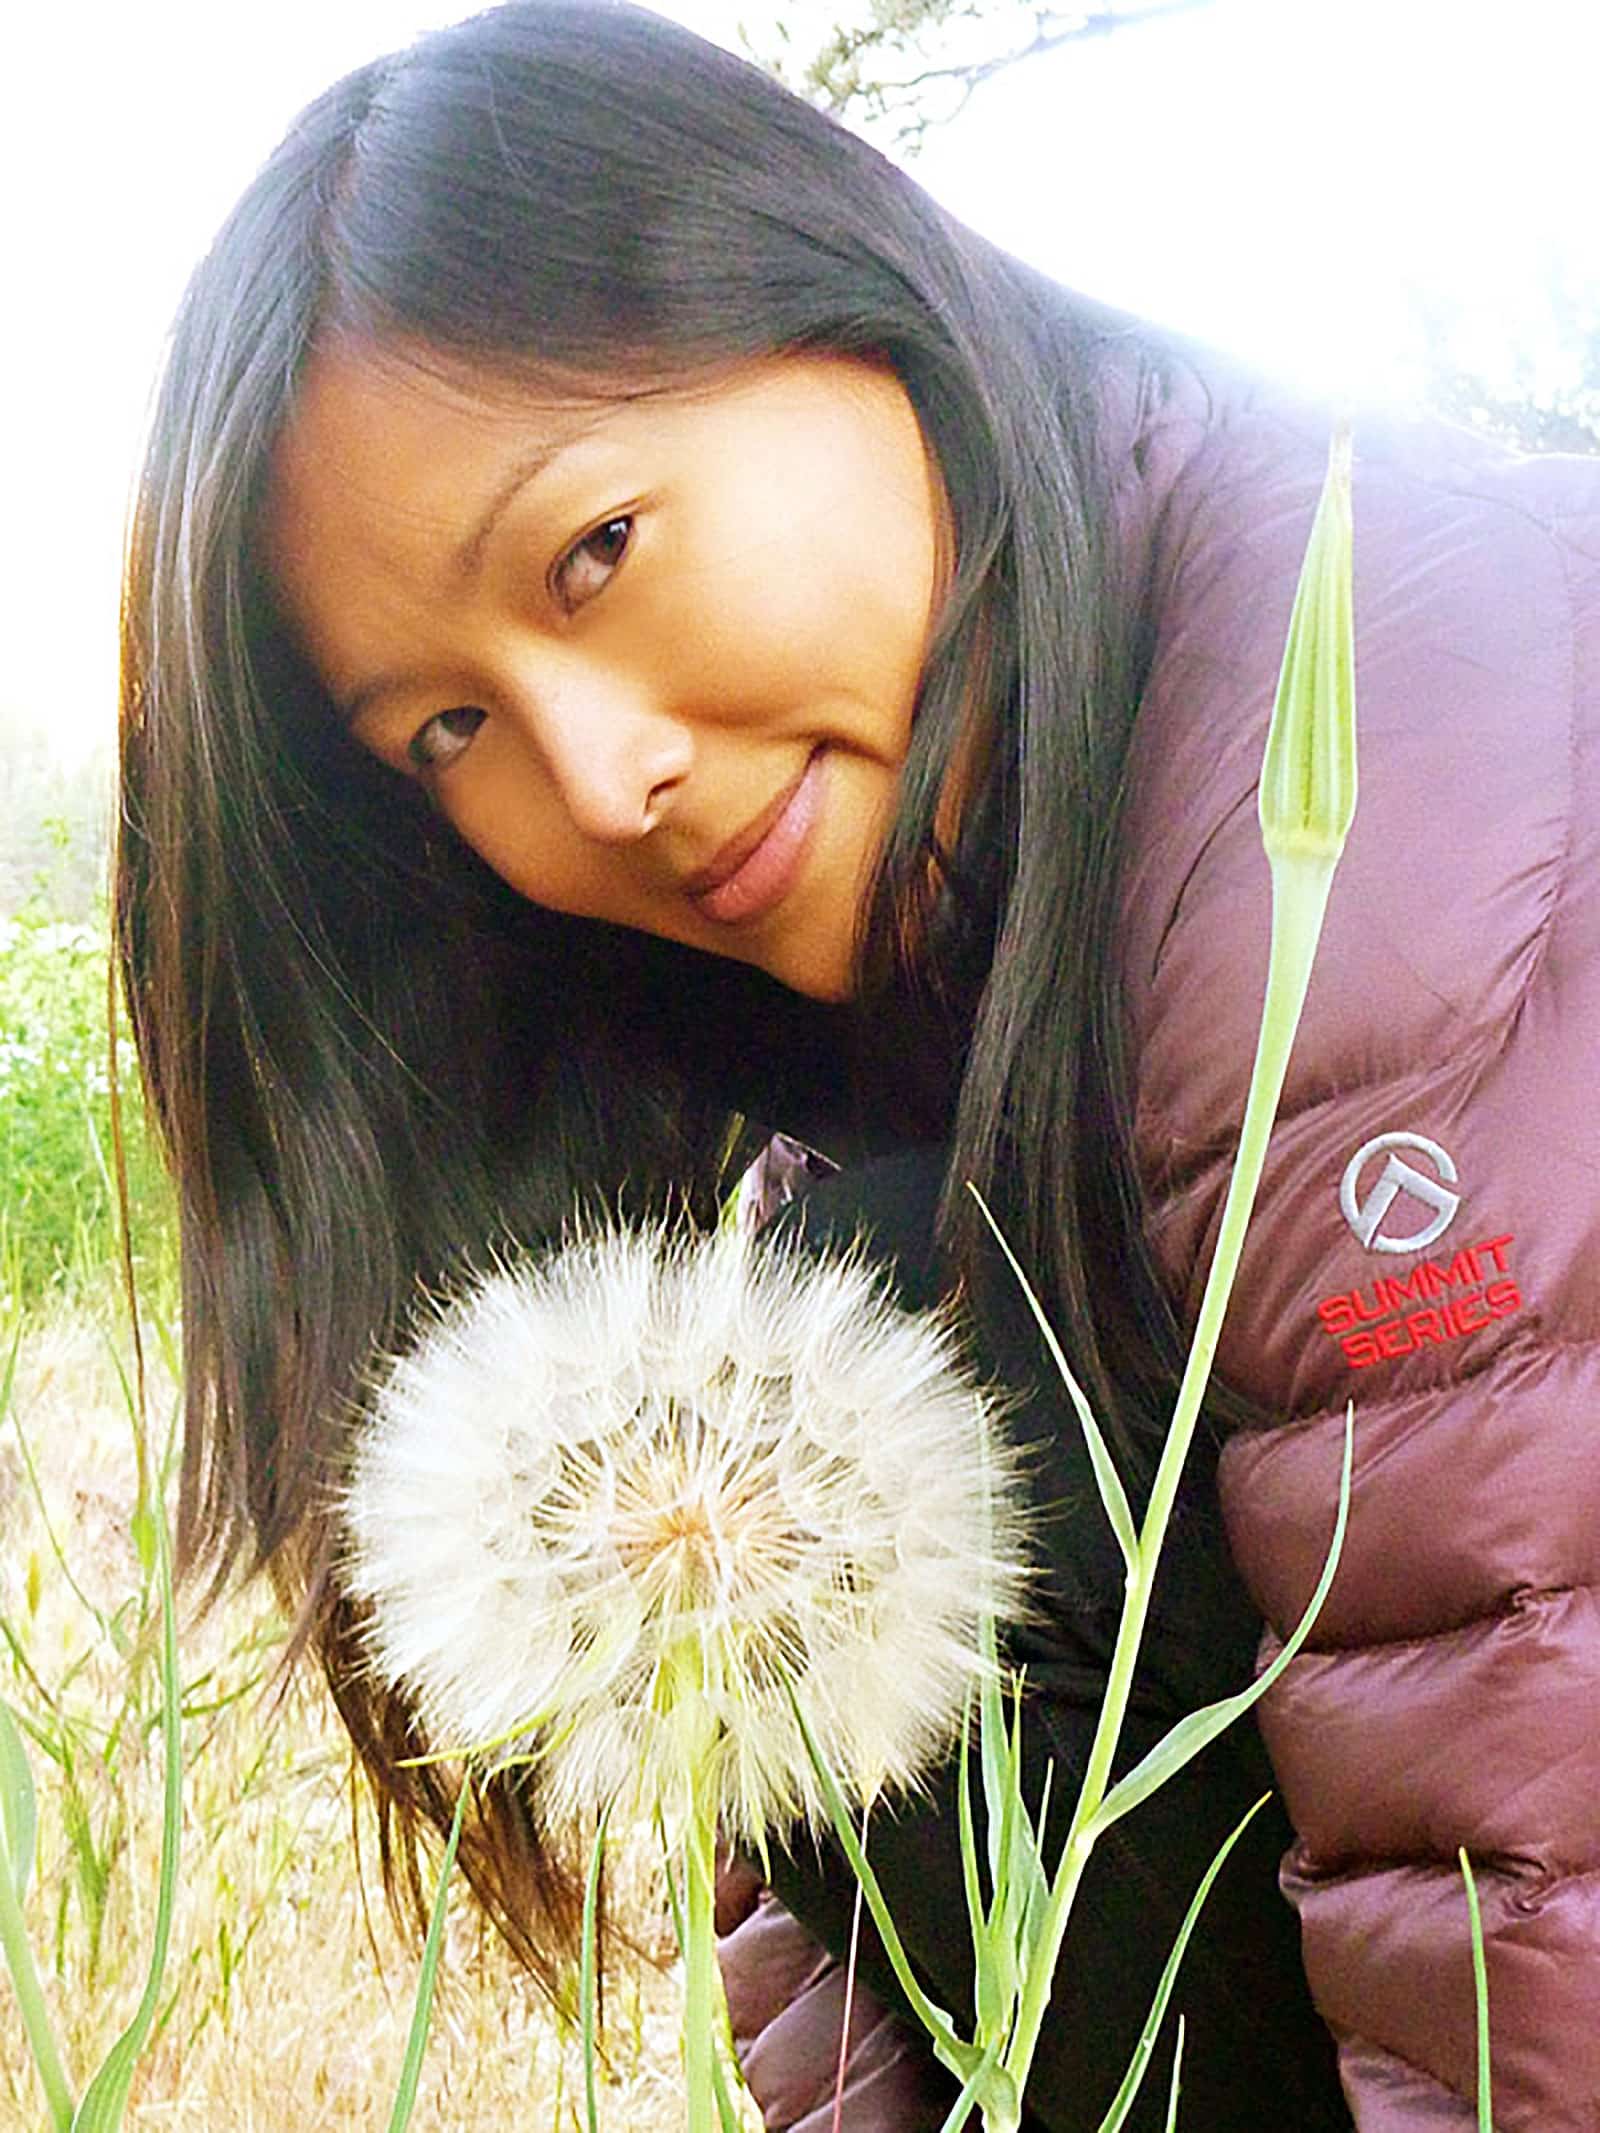 Linda Ly in a maroon puffy jacket, sitting behind a large salsify flower seed head in a meadow